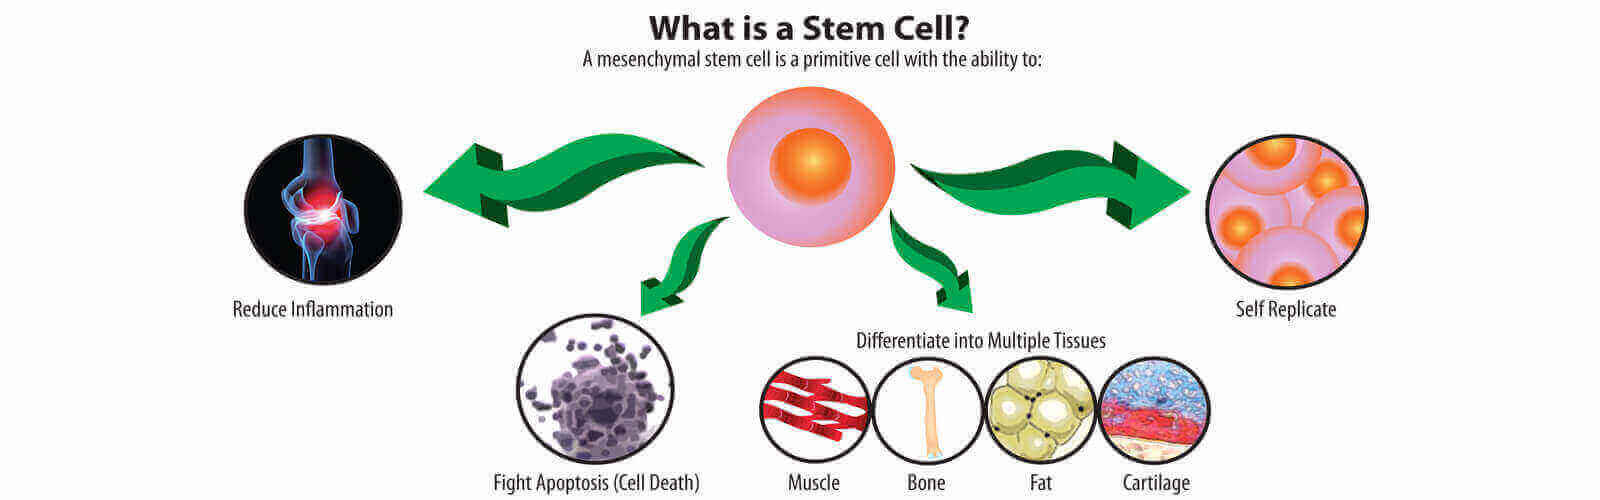 Stem Cell Treatment in Iran